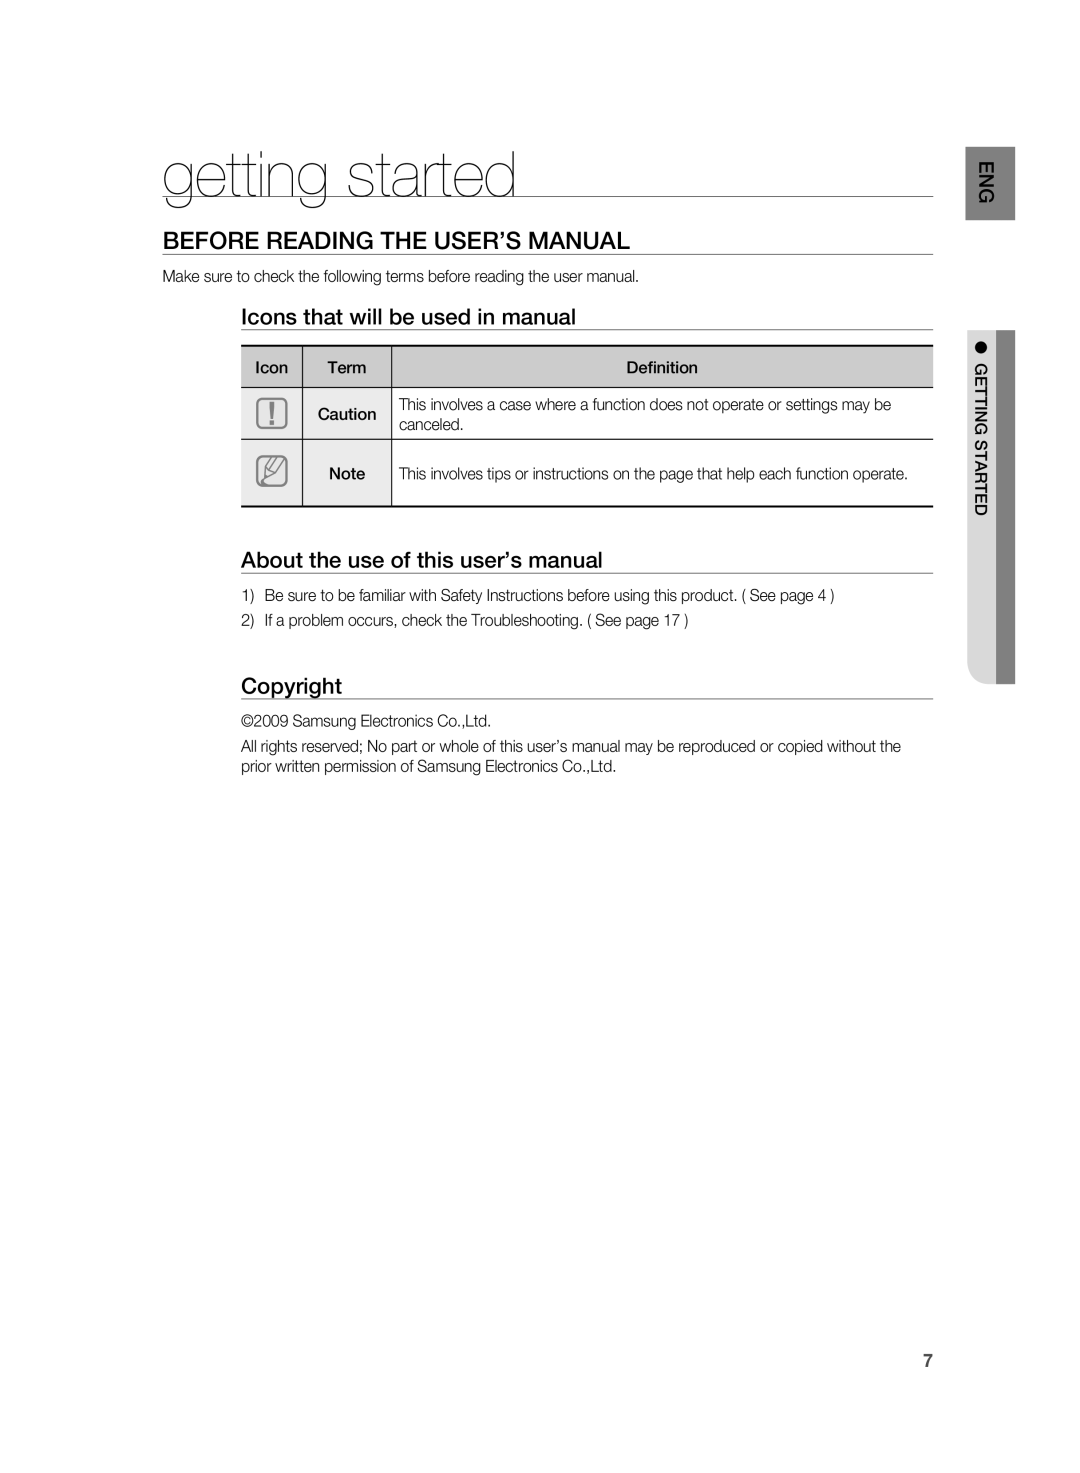 Samsung AH68-02184F user manual getting started, Icons that will be used in manual, Copyright 